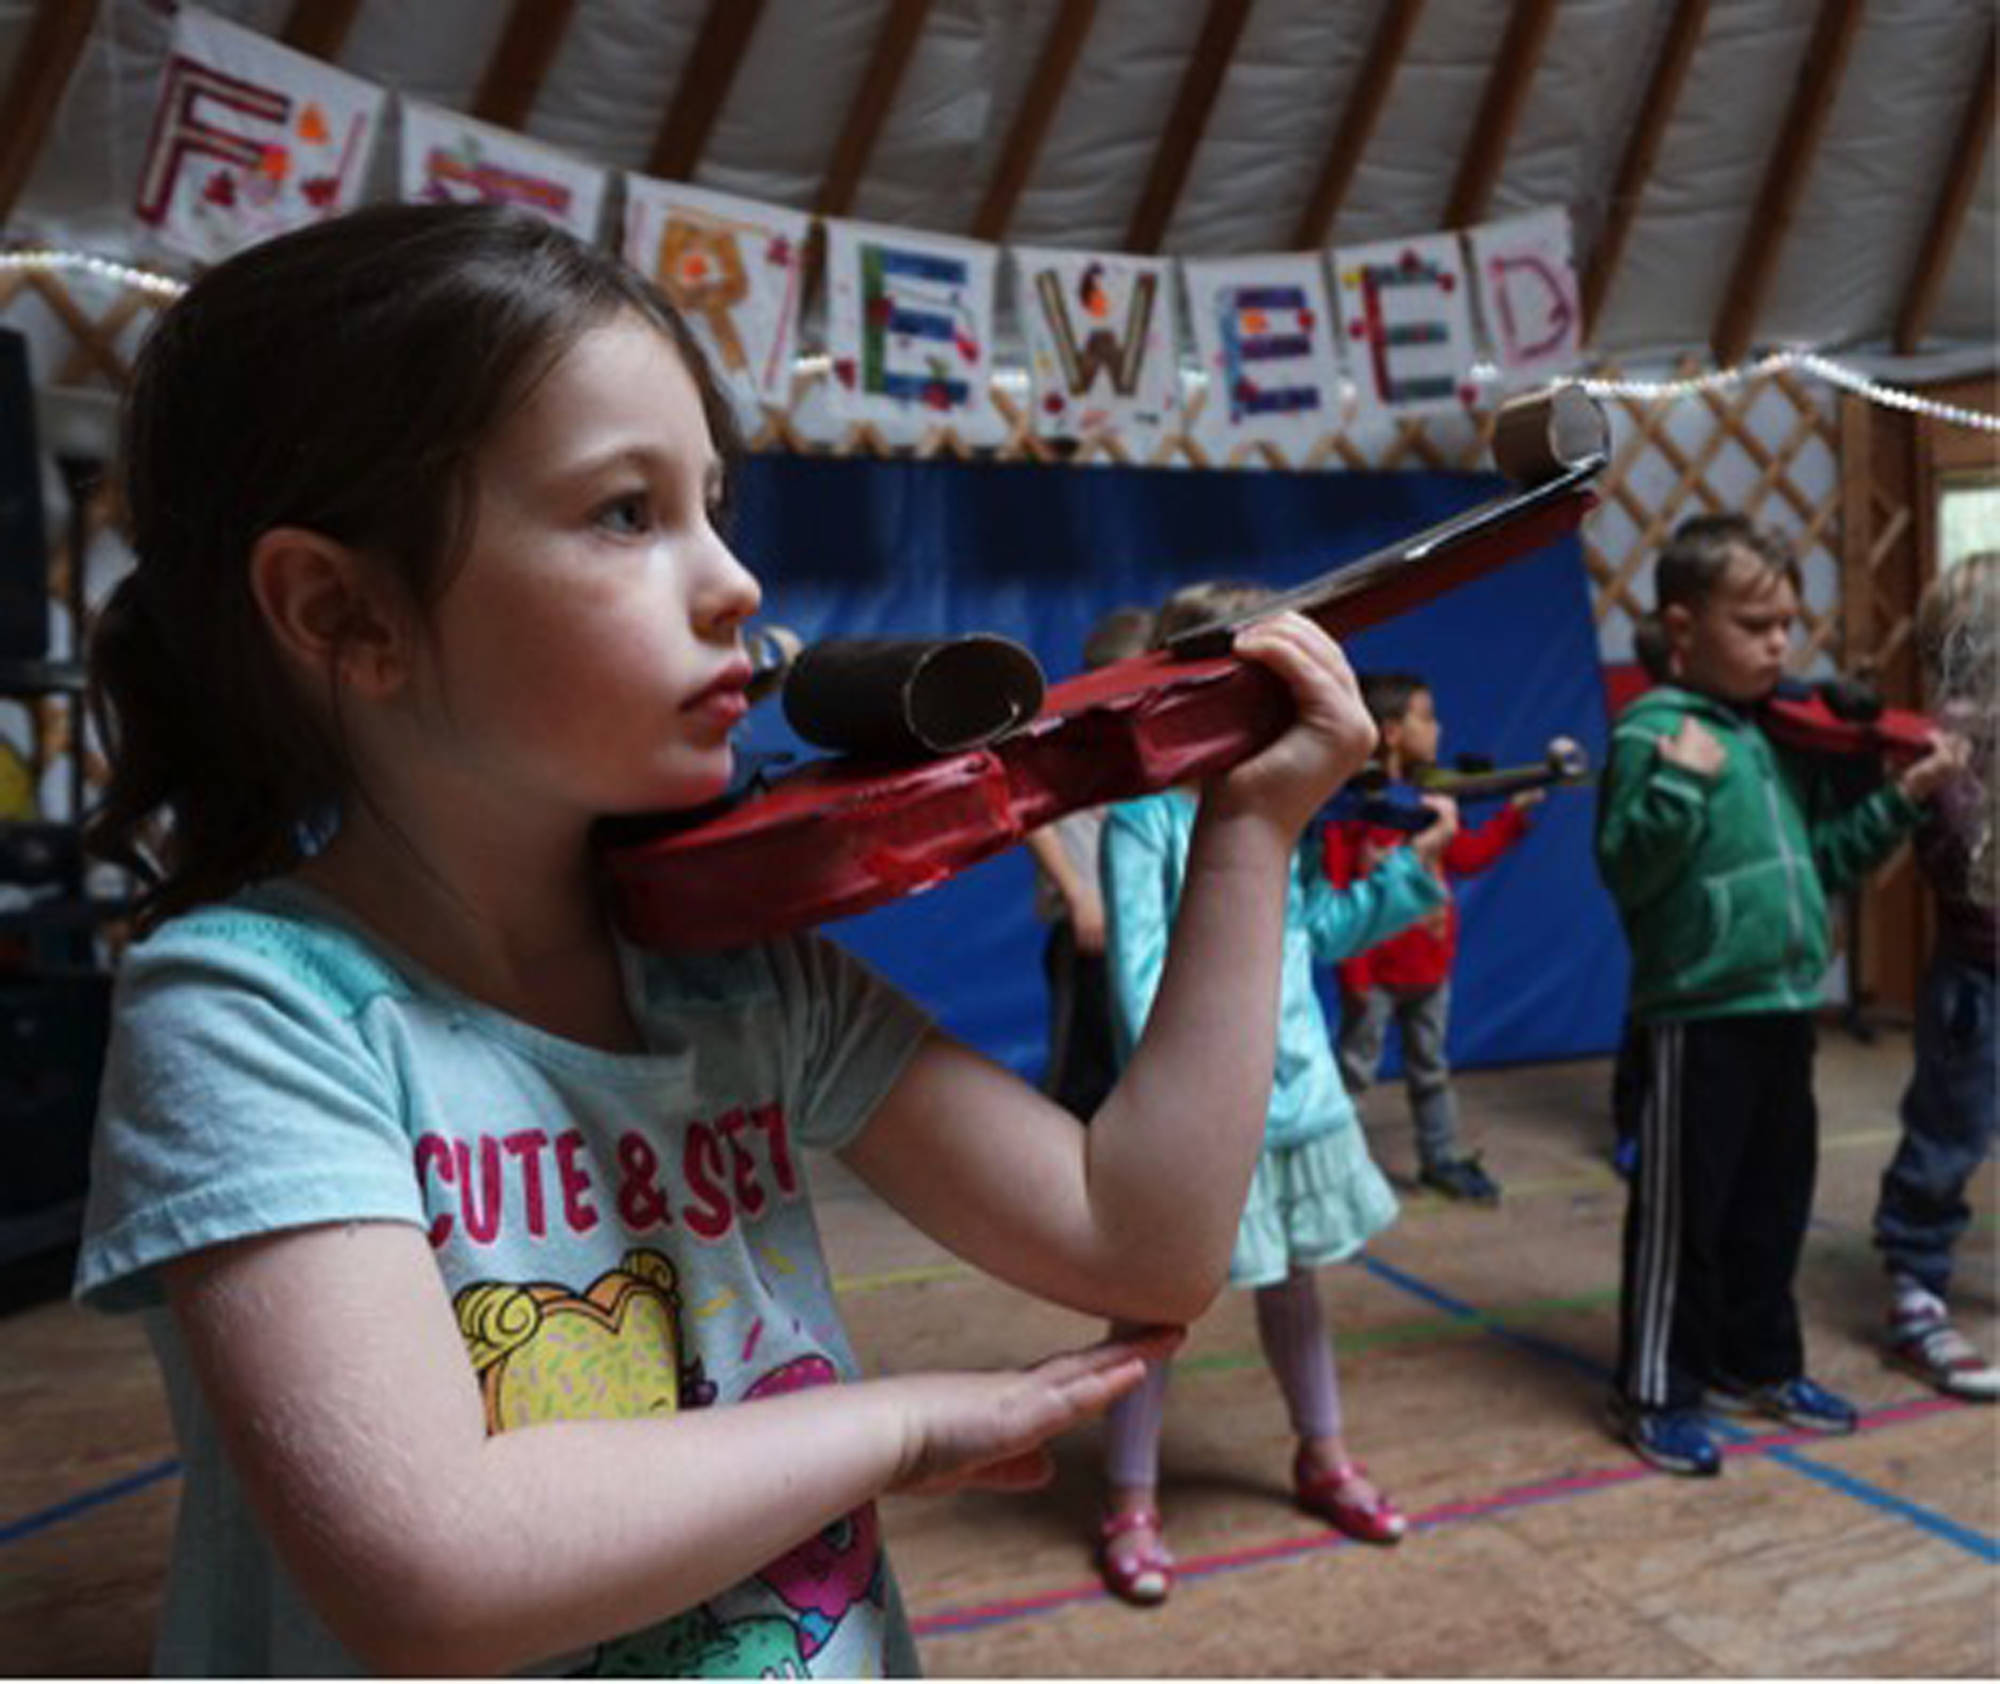 <span class="neFMT neFMT_PhotoCredit">Photo by Miranda Weiss</span>                                First grade student Elizabeth Parke practices holding a cardboard violin, in anticipation of the real thing, at Fireweed Academy in Homer.